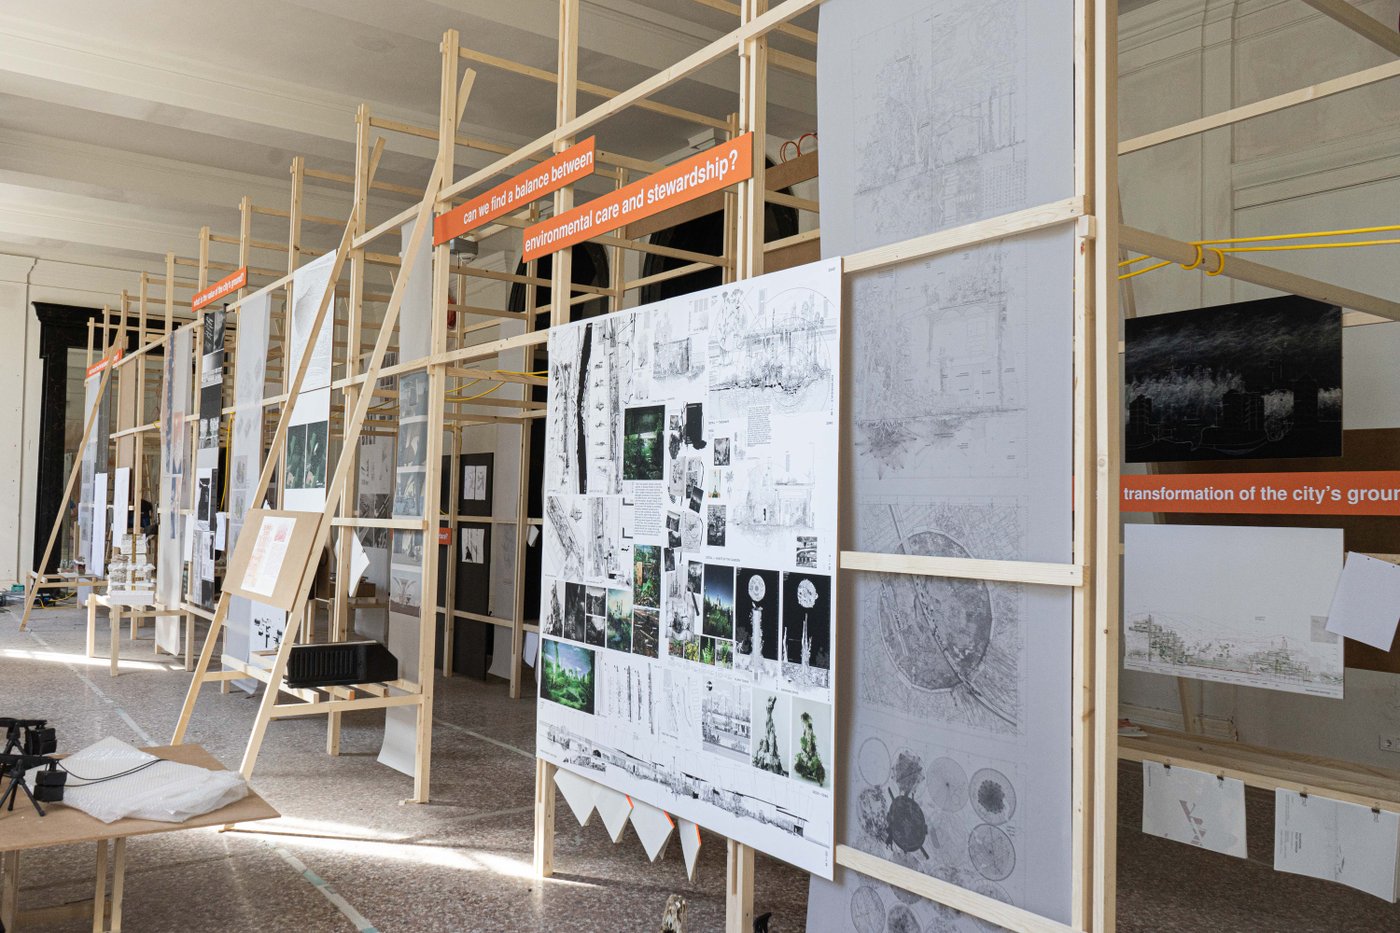 Exhibition view of the IKA's HITZE exhibition, various plans and drawings are mounted onto an almost room-high wooden scaffolding. An orange panel in the centre of the picture reads "can we find a balance between environmental care and stewardship?